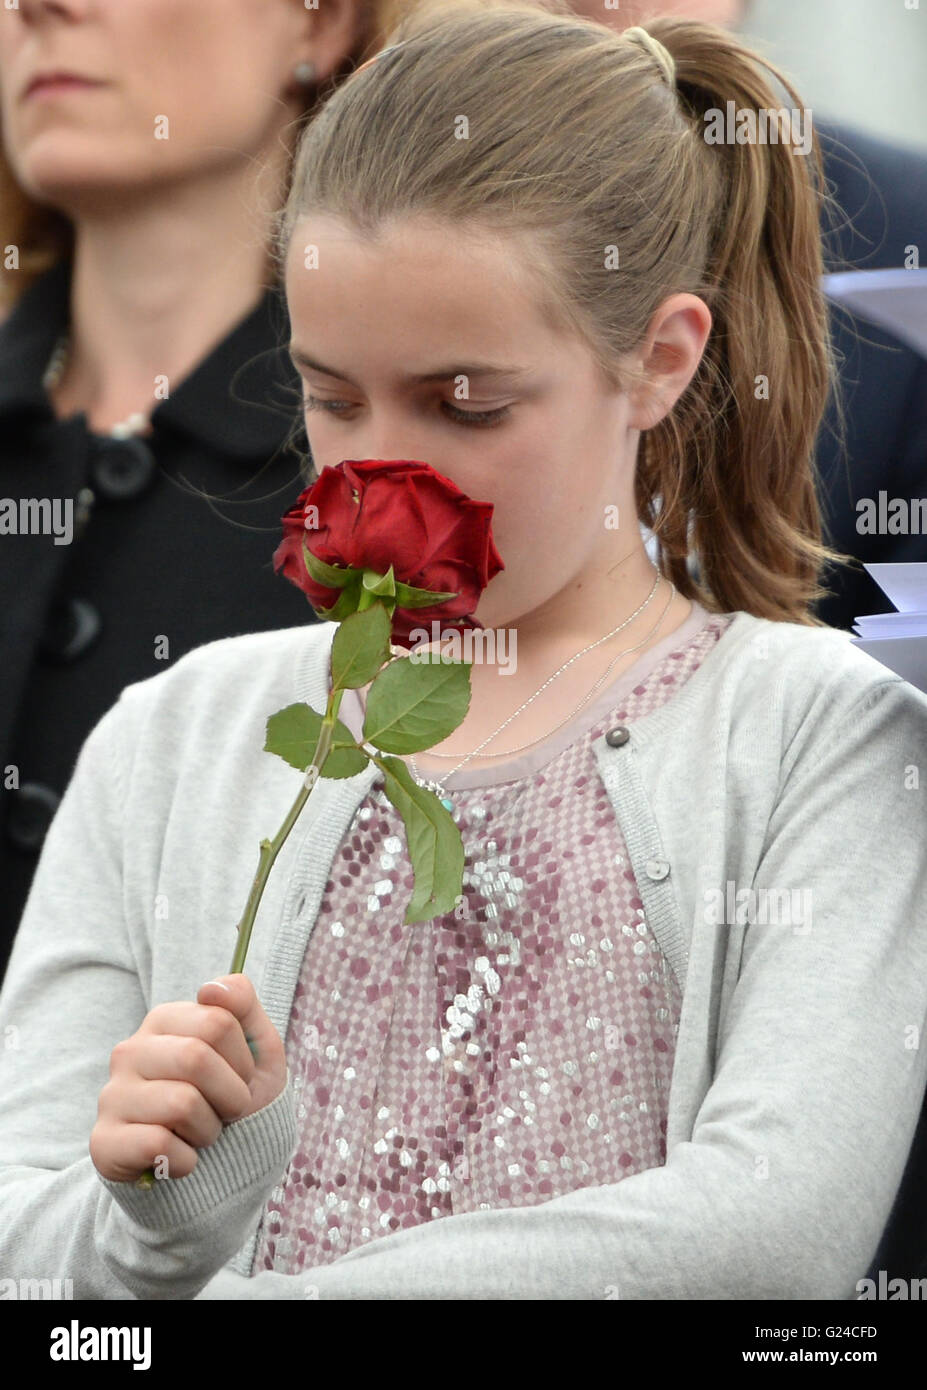 Agatha Heber-Percy, 11, great great grandchild of Admiral Sir John Jellicoe, holds a rose during a wreath laying ceremony to commemorate the Battle of Jutland in Trafalgar Square, London. Stock Photo